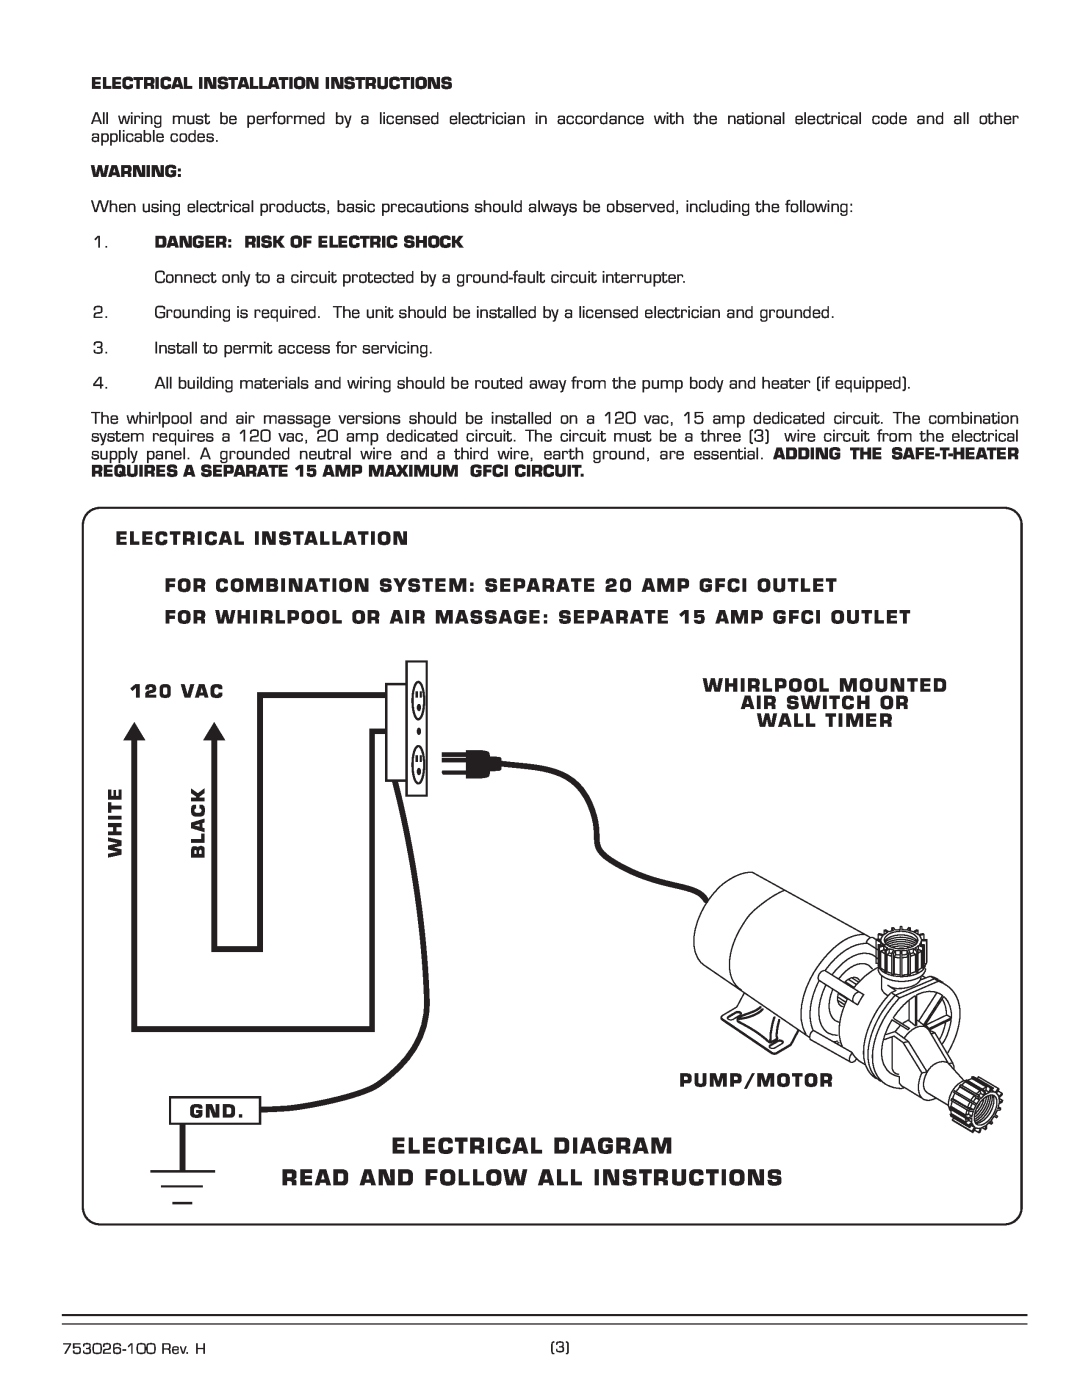 American Standard 2748.XXXX installation instructions Electrical Diagram, Read And Follow All Instructions 